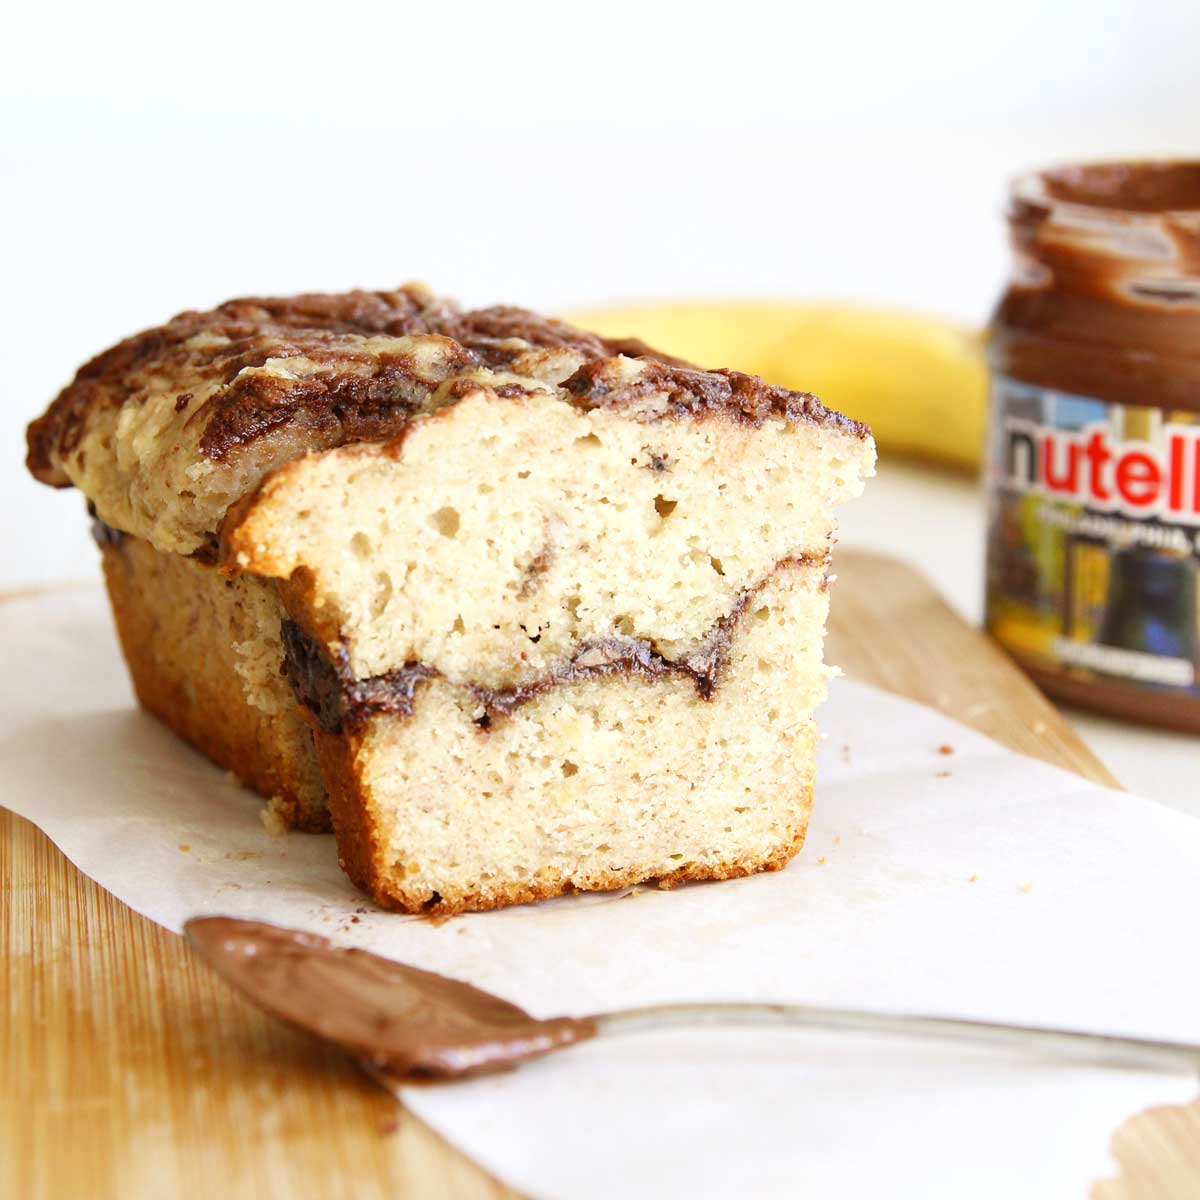 Super Moist Nutella Stuffed Banana Bread with Olive Oil & Almond Flour - Peppermint Whipped Cream